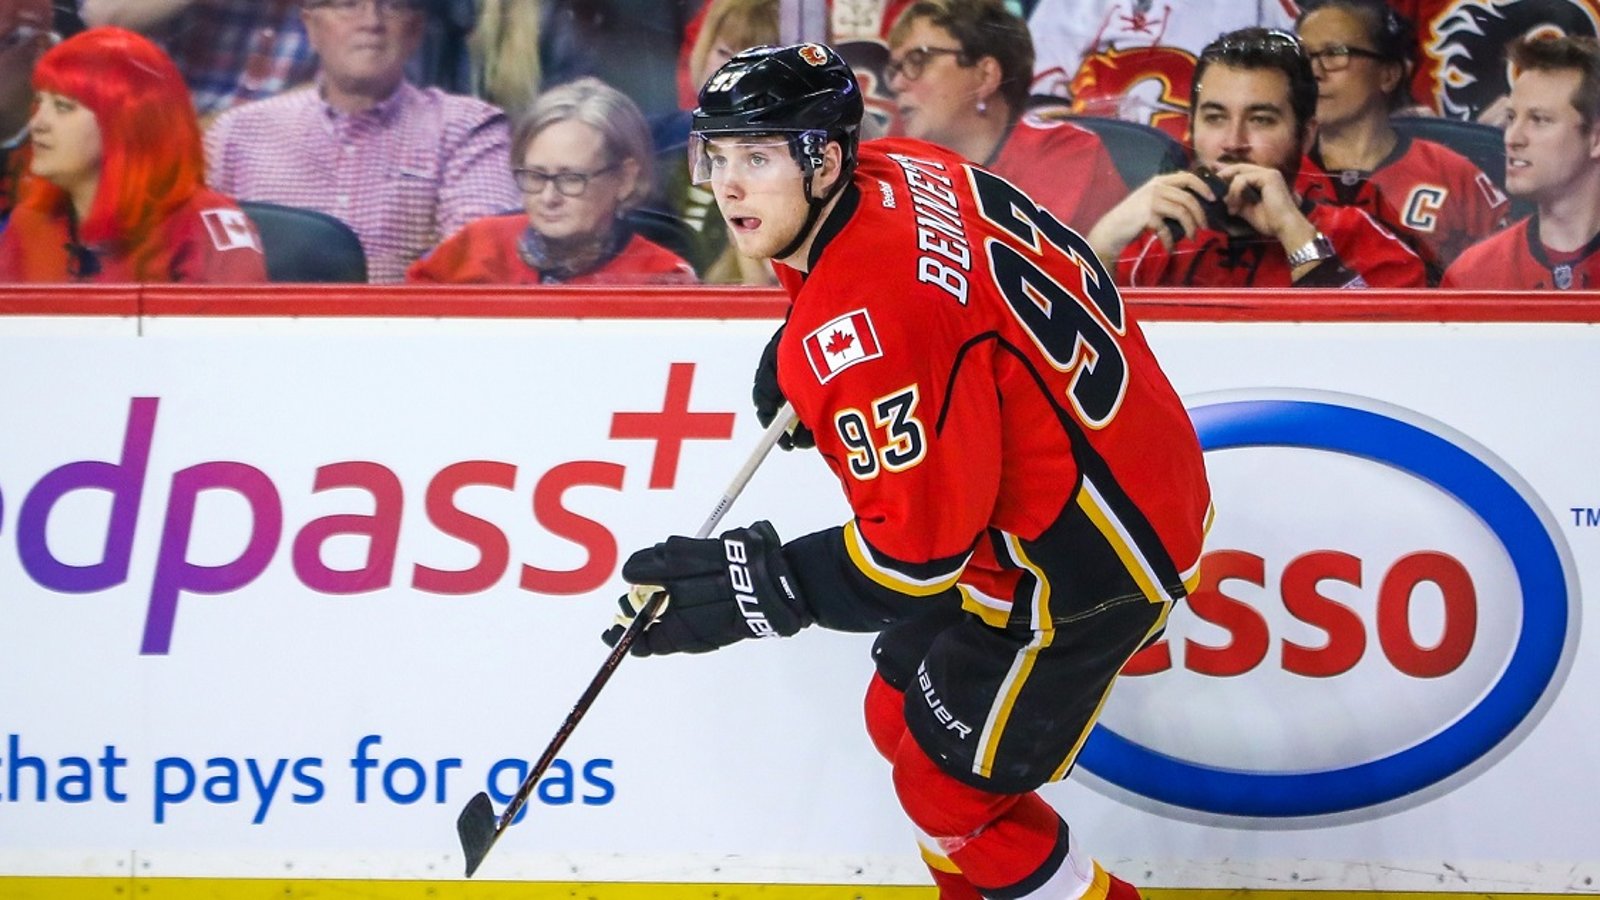 Report: Sam Bennett has requested a trade.